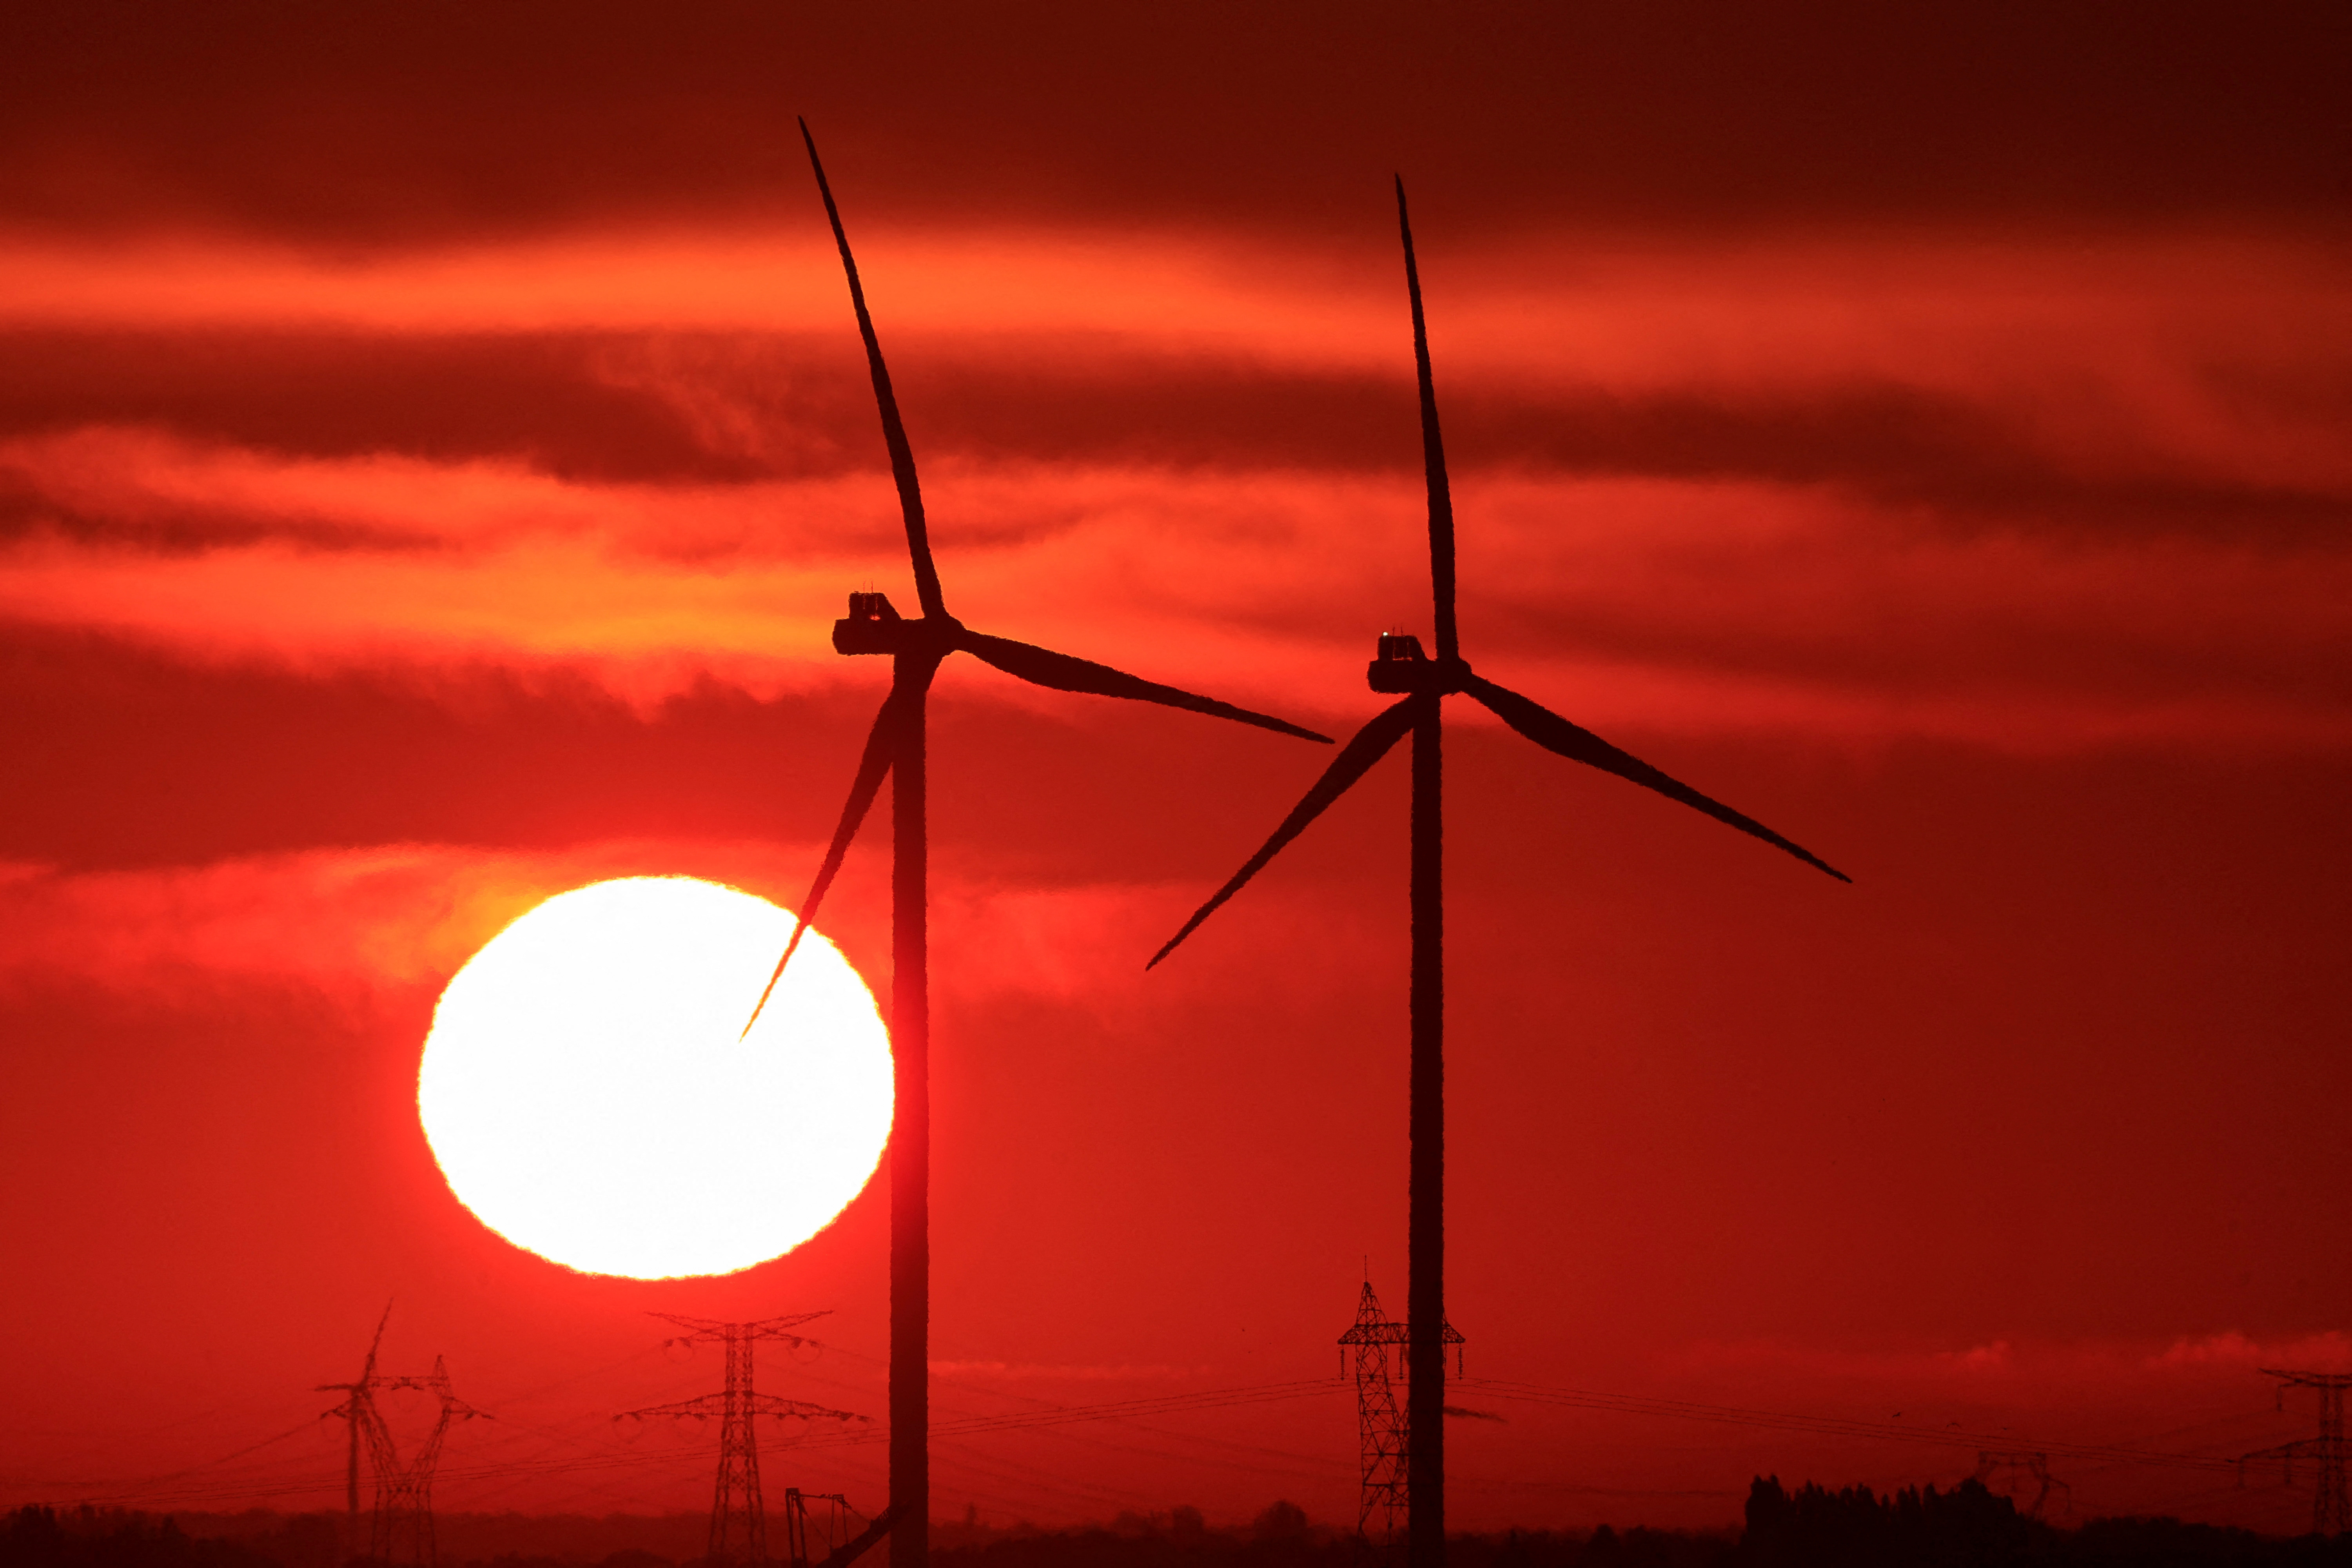 Wind power outpaced gas plants in Europe for the first time in